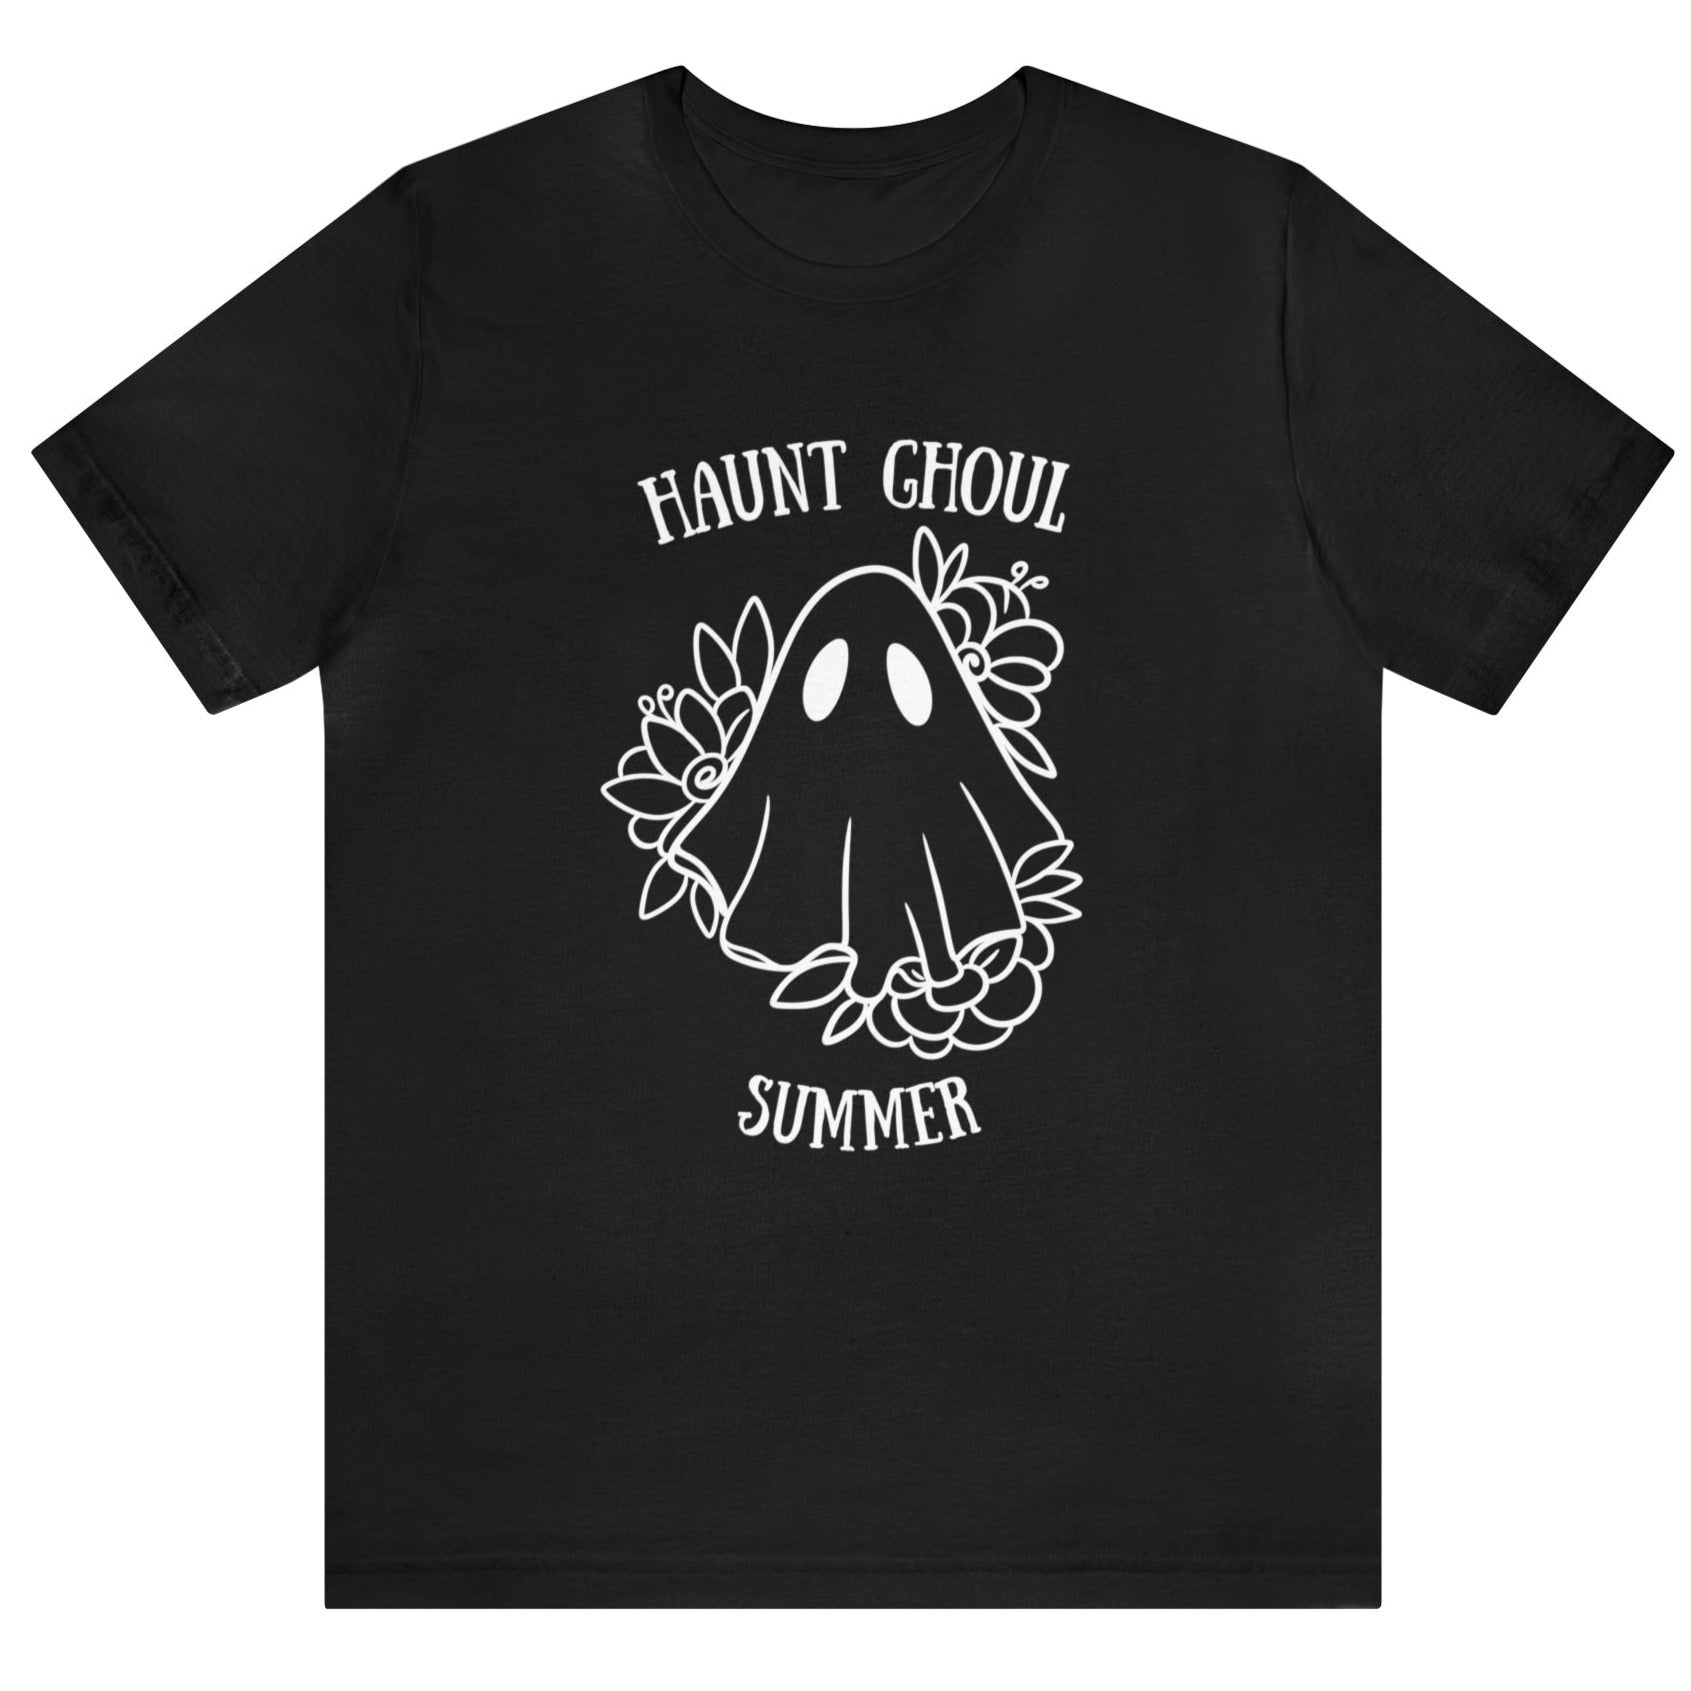 Haunt Ghoul Summer Ghost Top by The Dark Side of Fashion